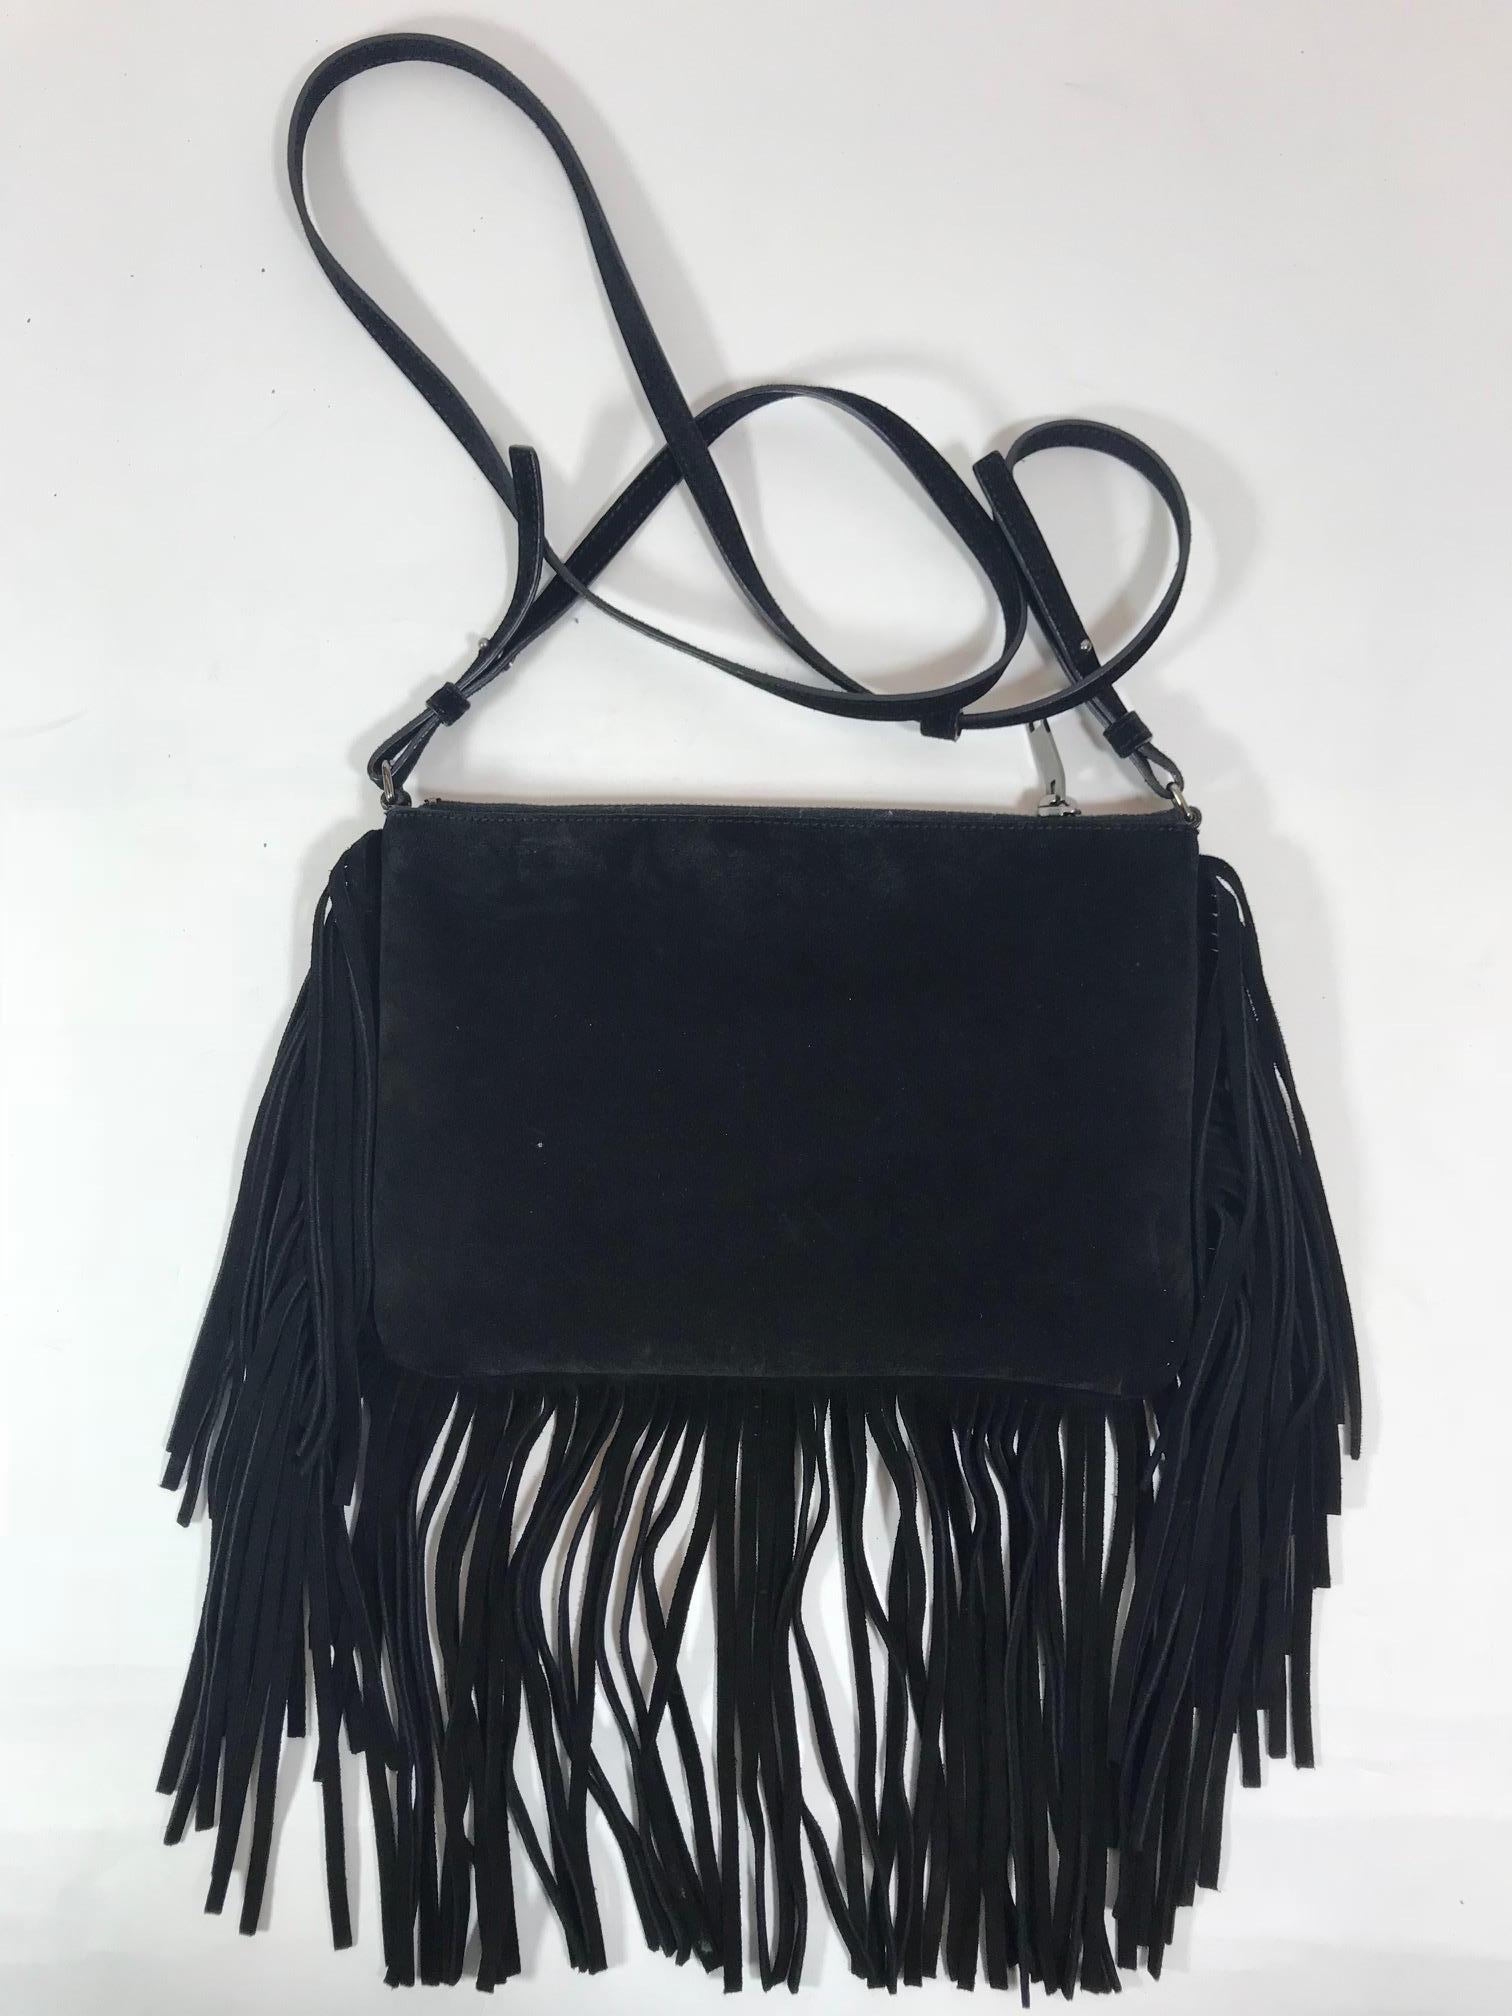 Black suede Saint Laurent crossbody bag with silver-tone hardware, suede flat adjustable strap, fringe trim throughout, canvas lining, eight pockets at interior and zip closure at top. 